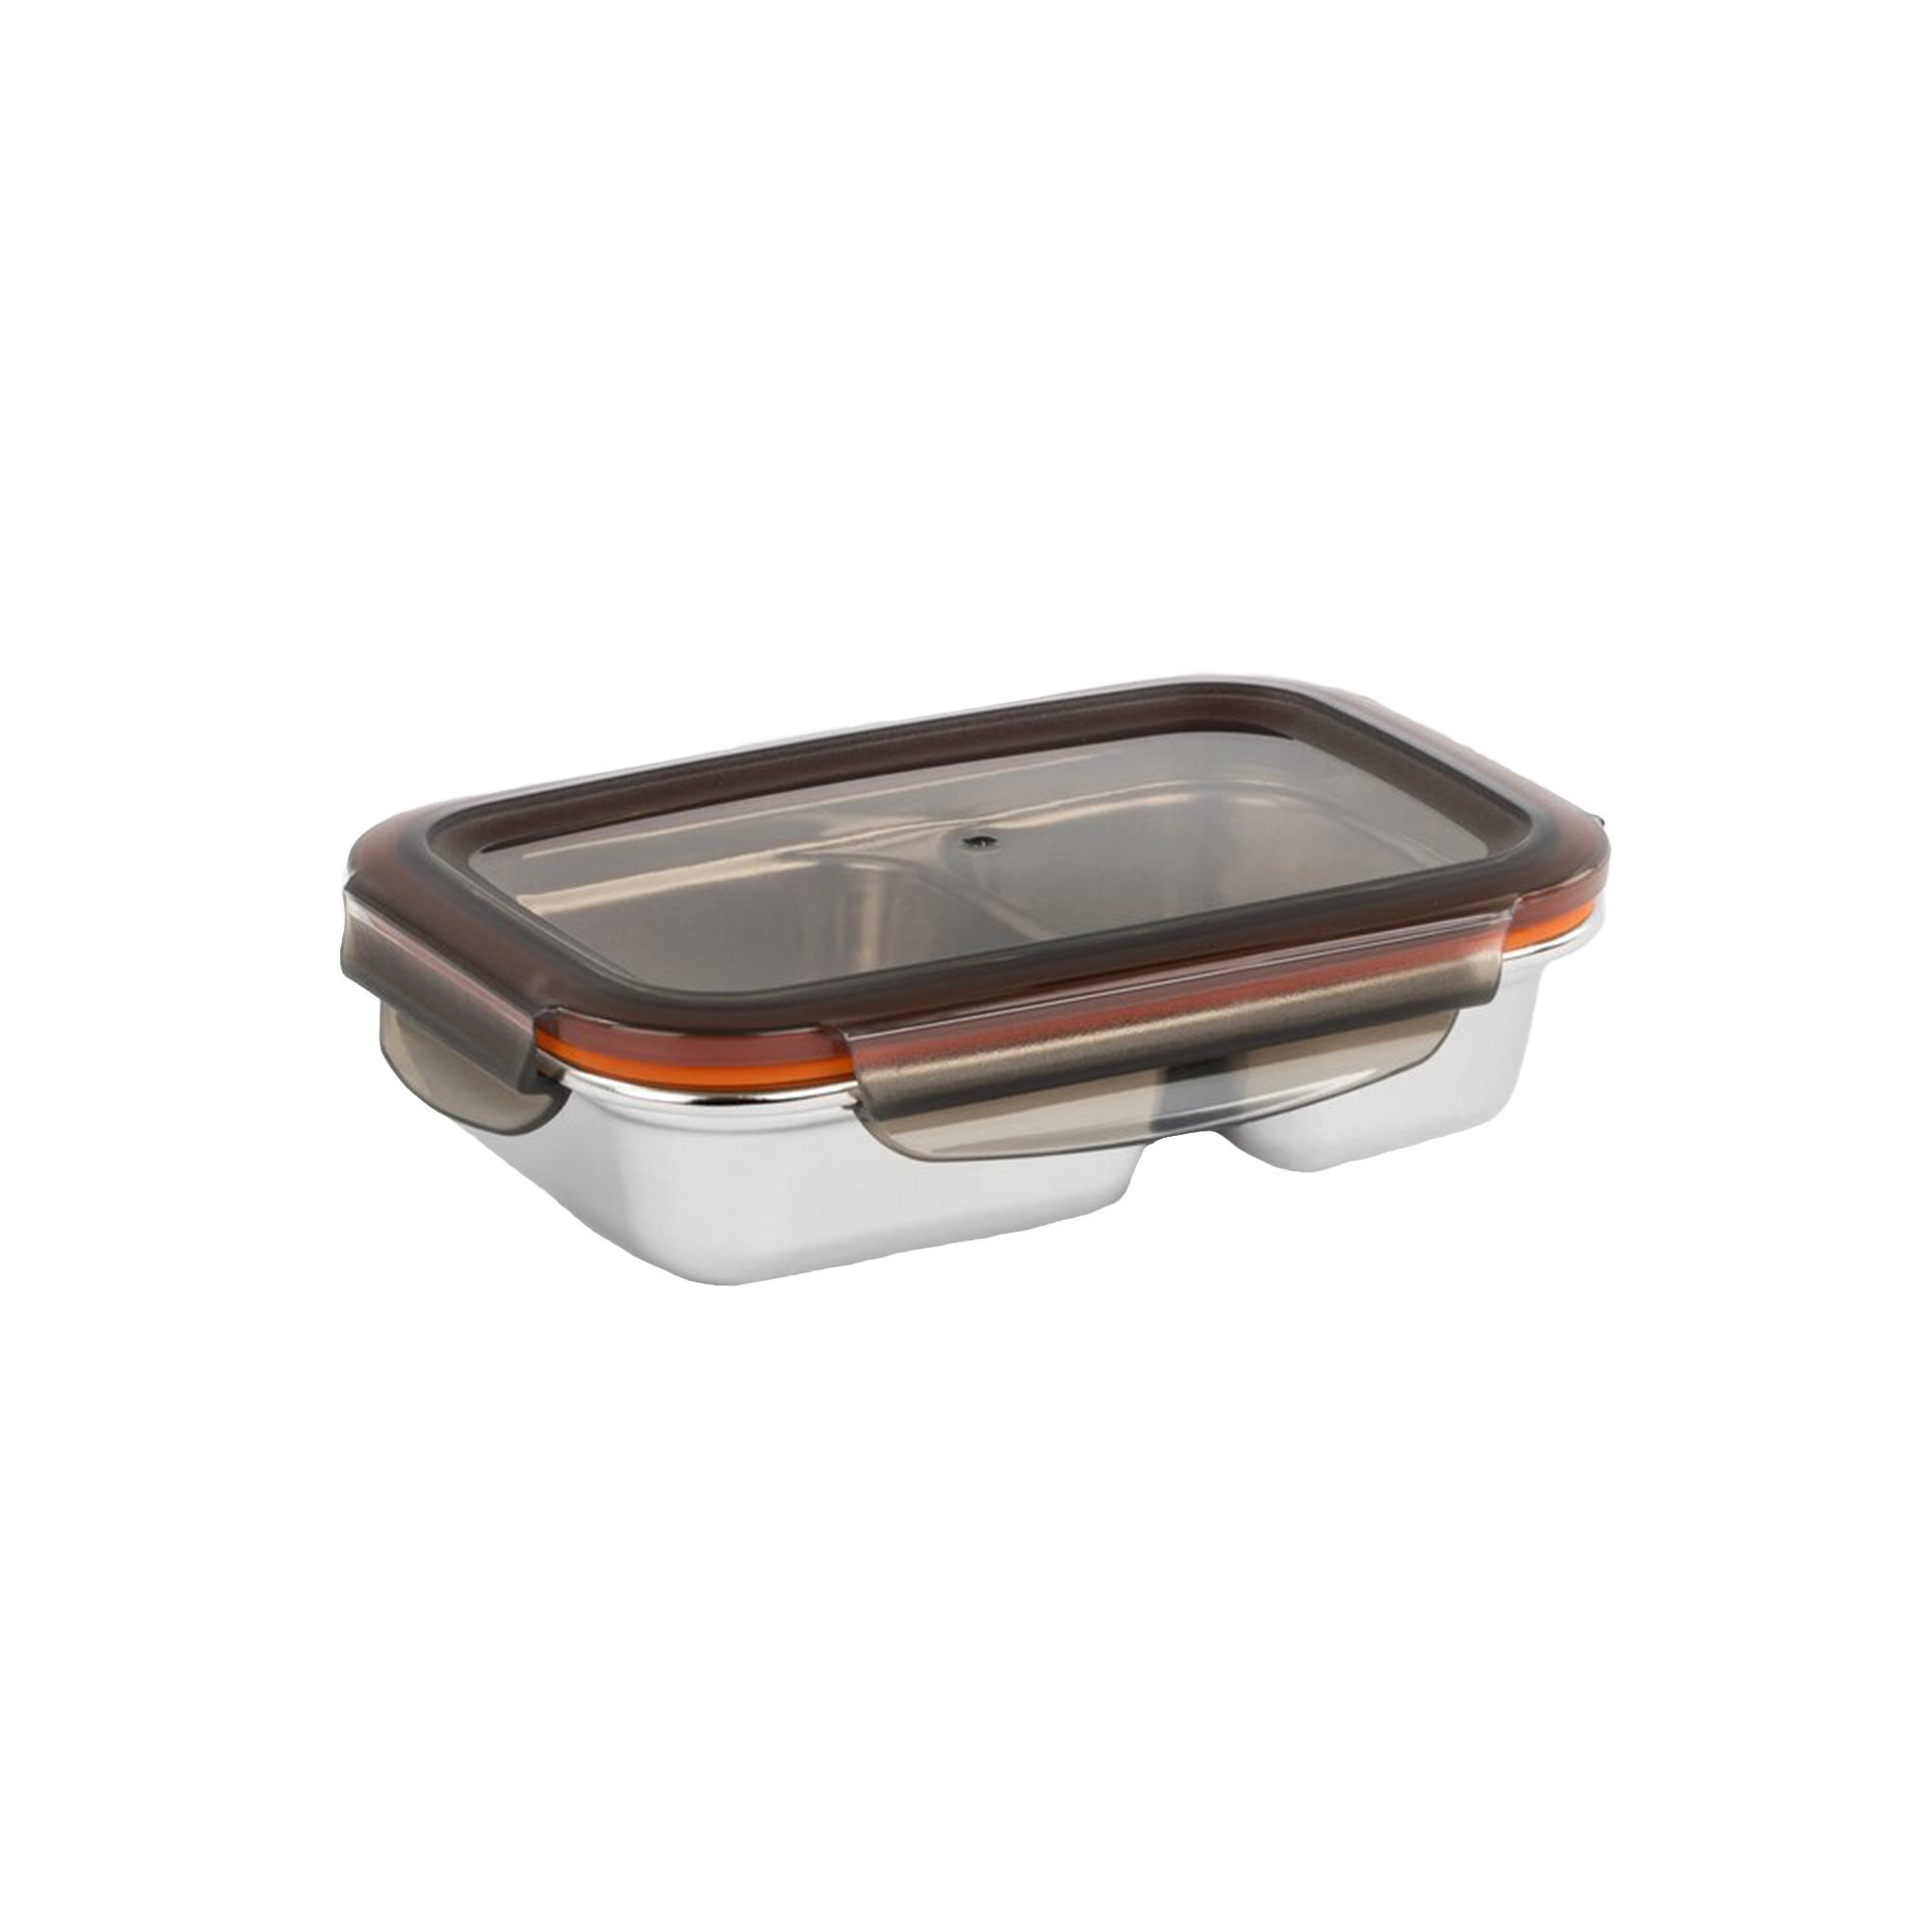 Rectangular food storage container, compartmentalized, stainless